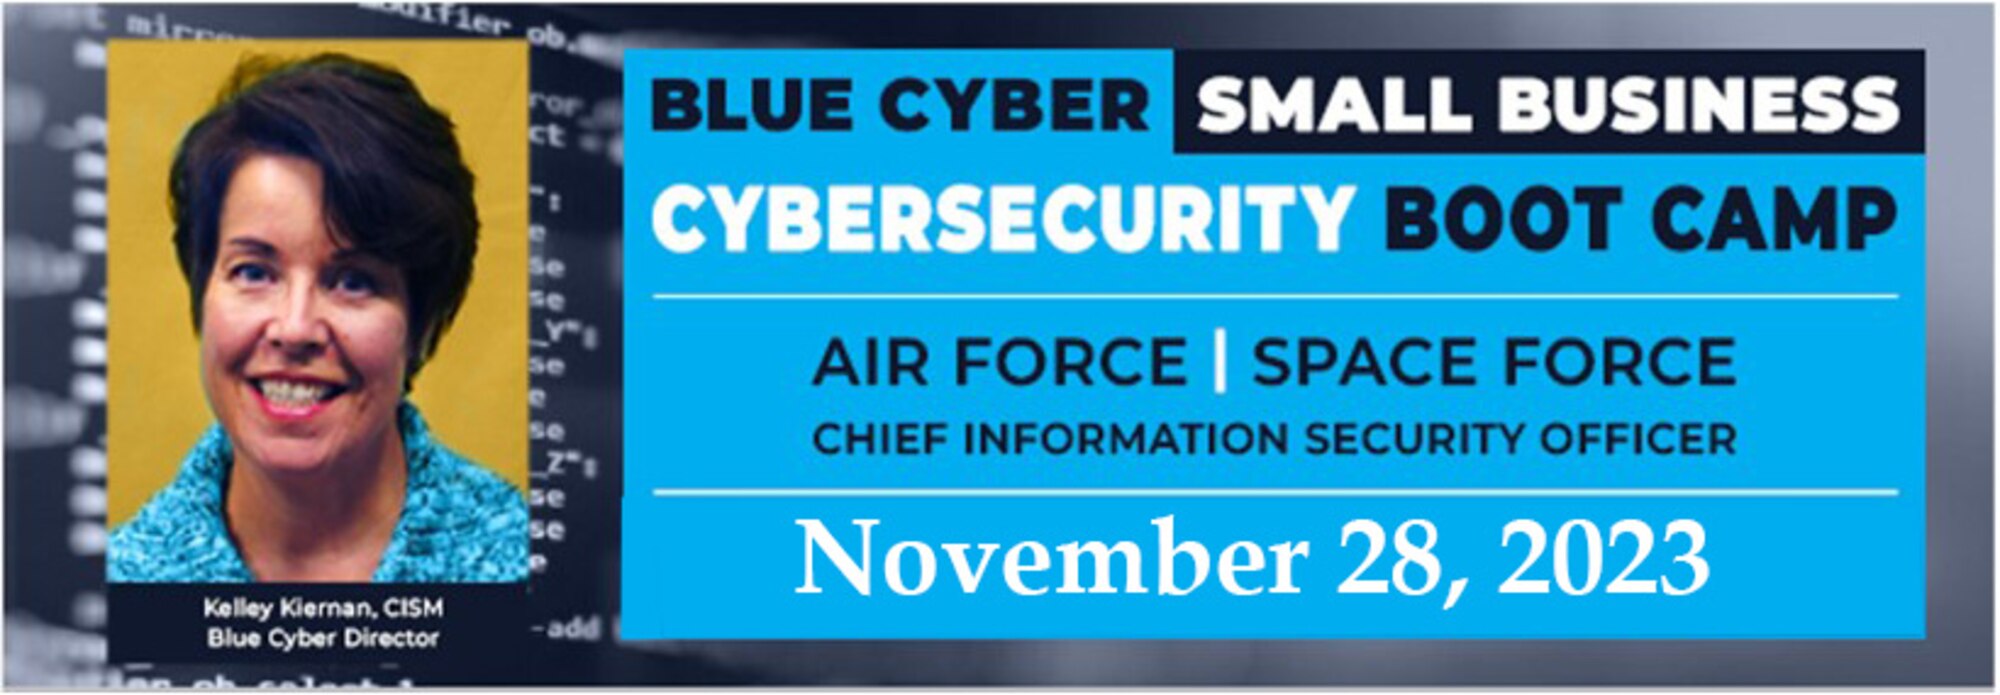 Blue Cyber Small Business